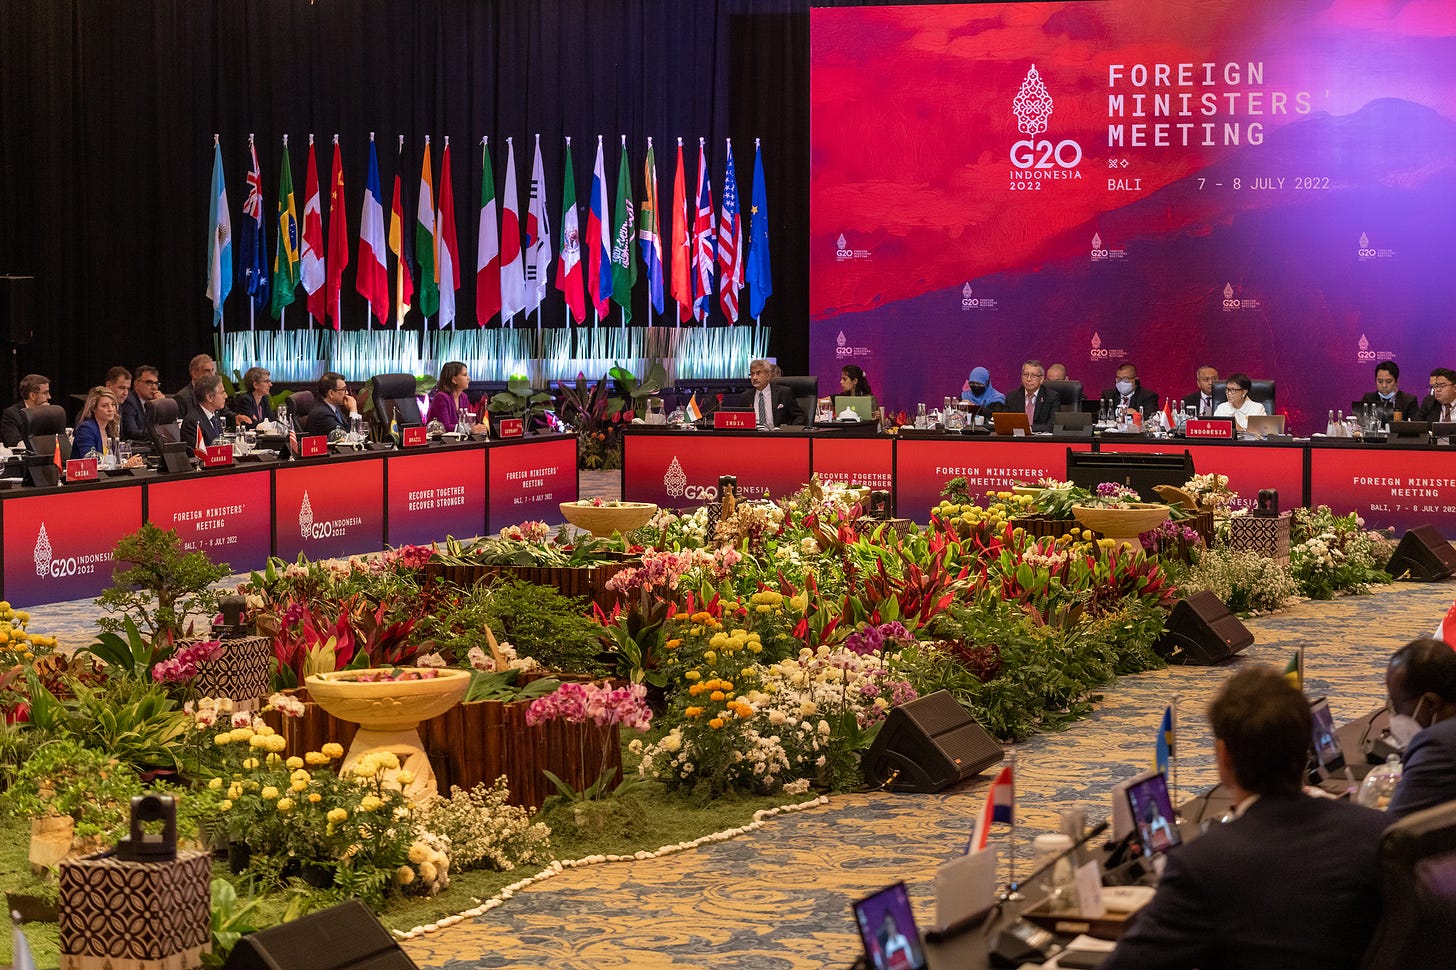 G20 Foreign Ministers’ meeting in Bali on July 8, 2022 (Image: Ron Przysucha/US Department of State; public domain)